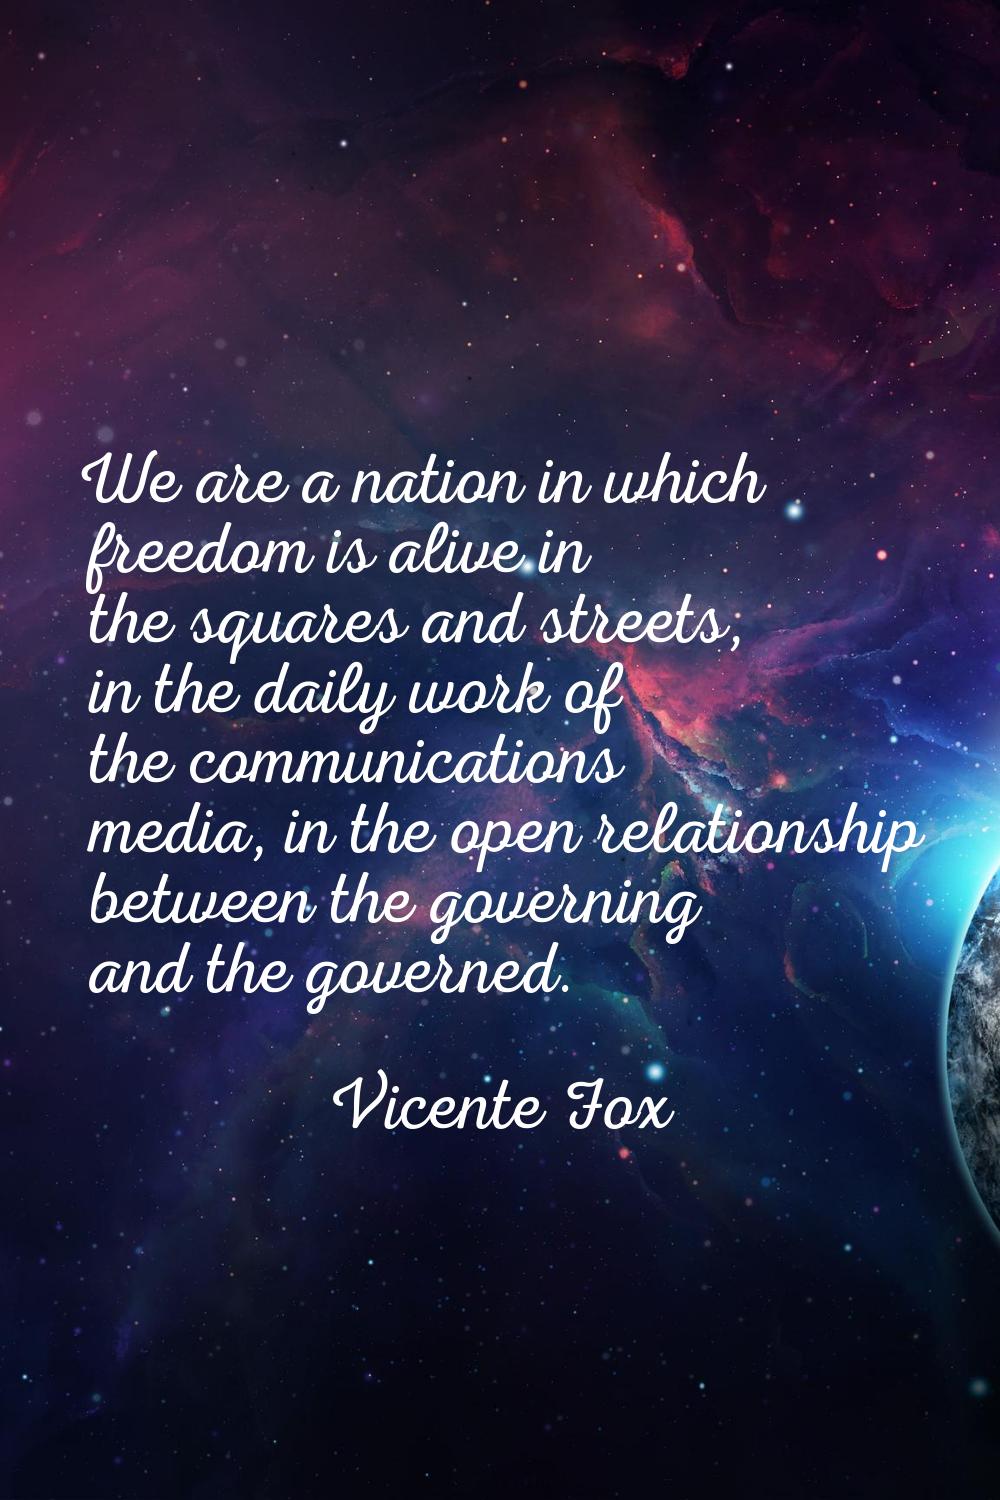 We are a nation in which freedom is alive in the squares and streets, in the daily work of the comm